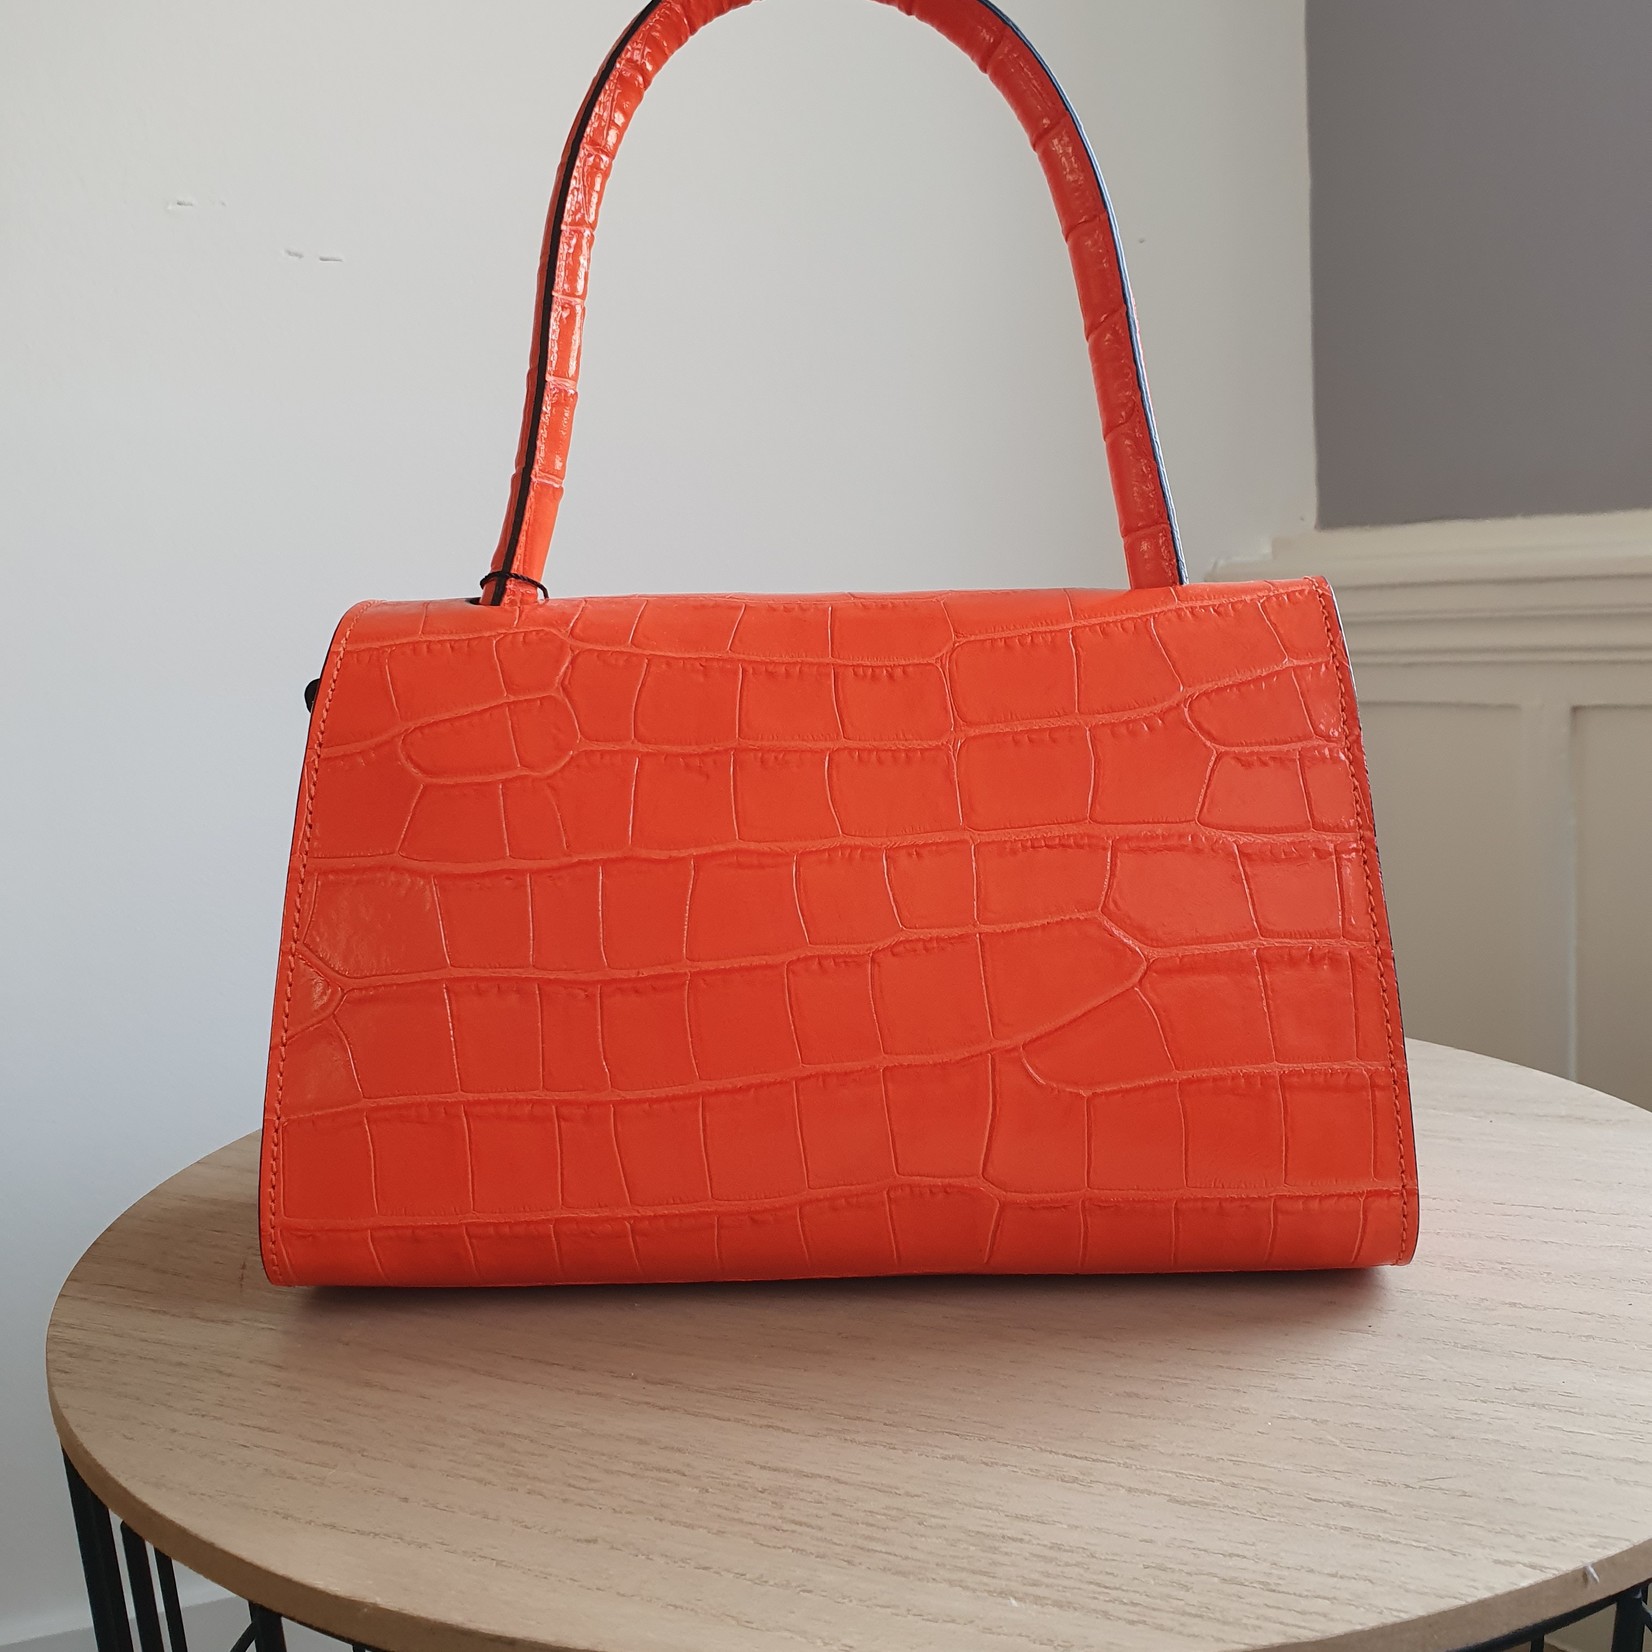 FIRST LADY FIRENZE Leather orange bag with print